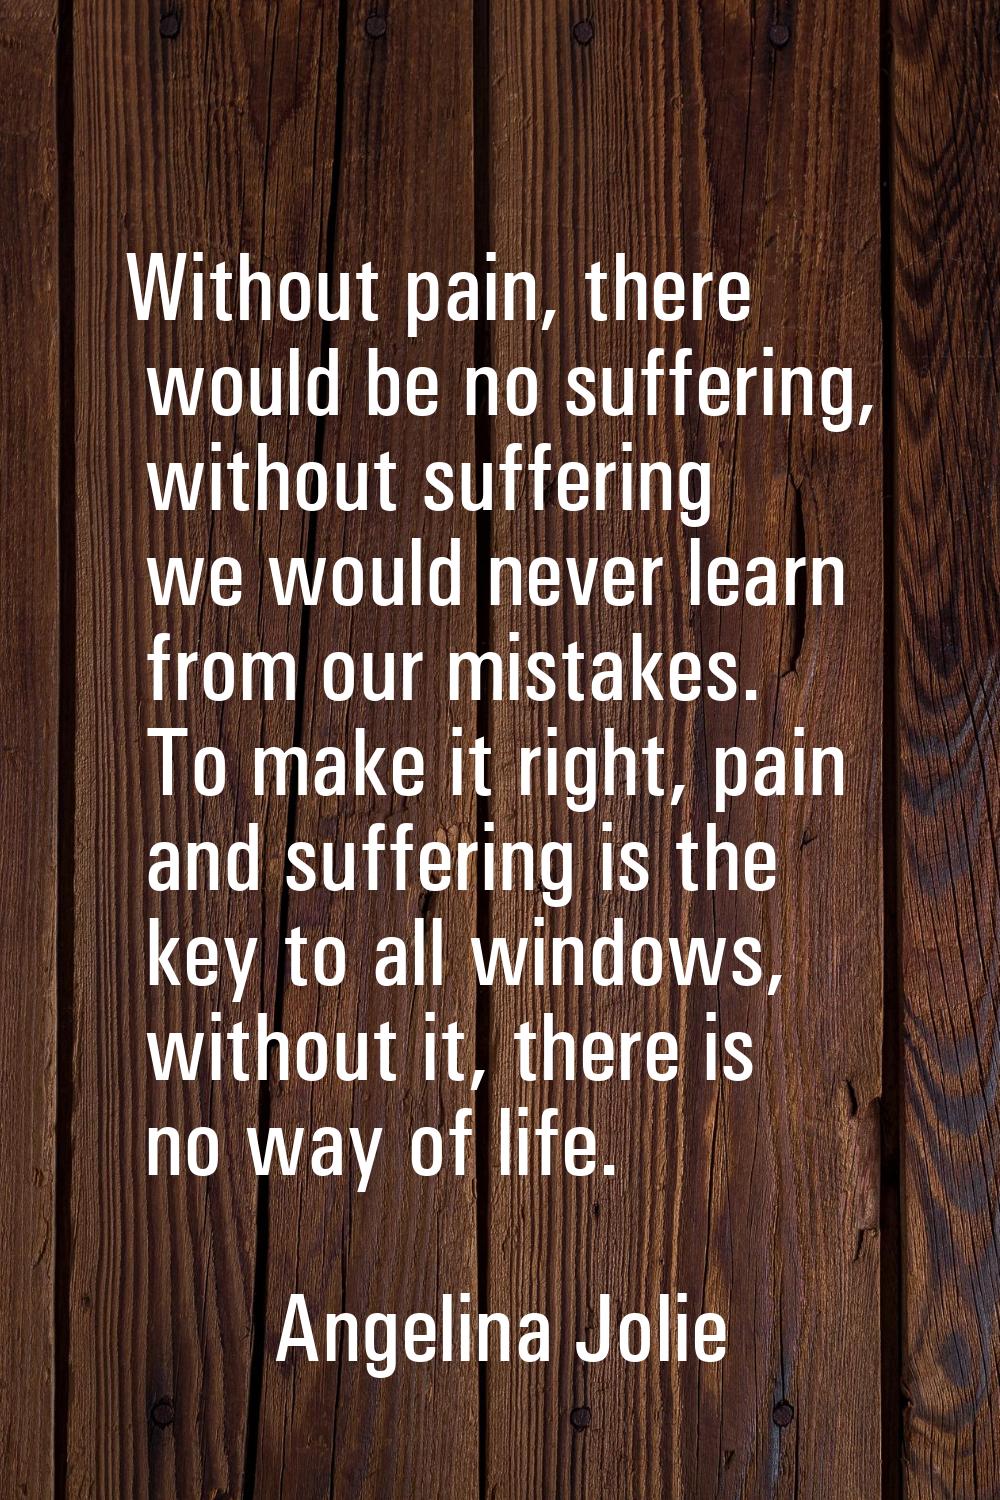 Without pain, there would be no suffering, without suffering we would never learn from our mistakes